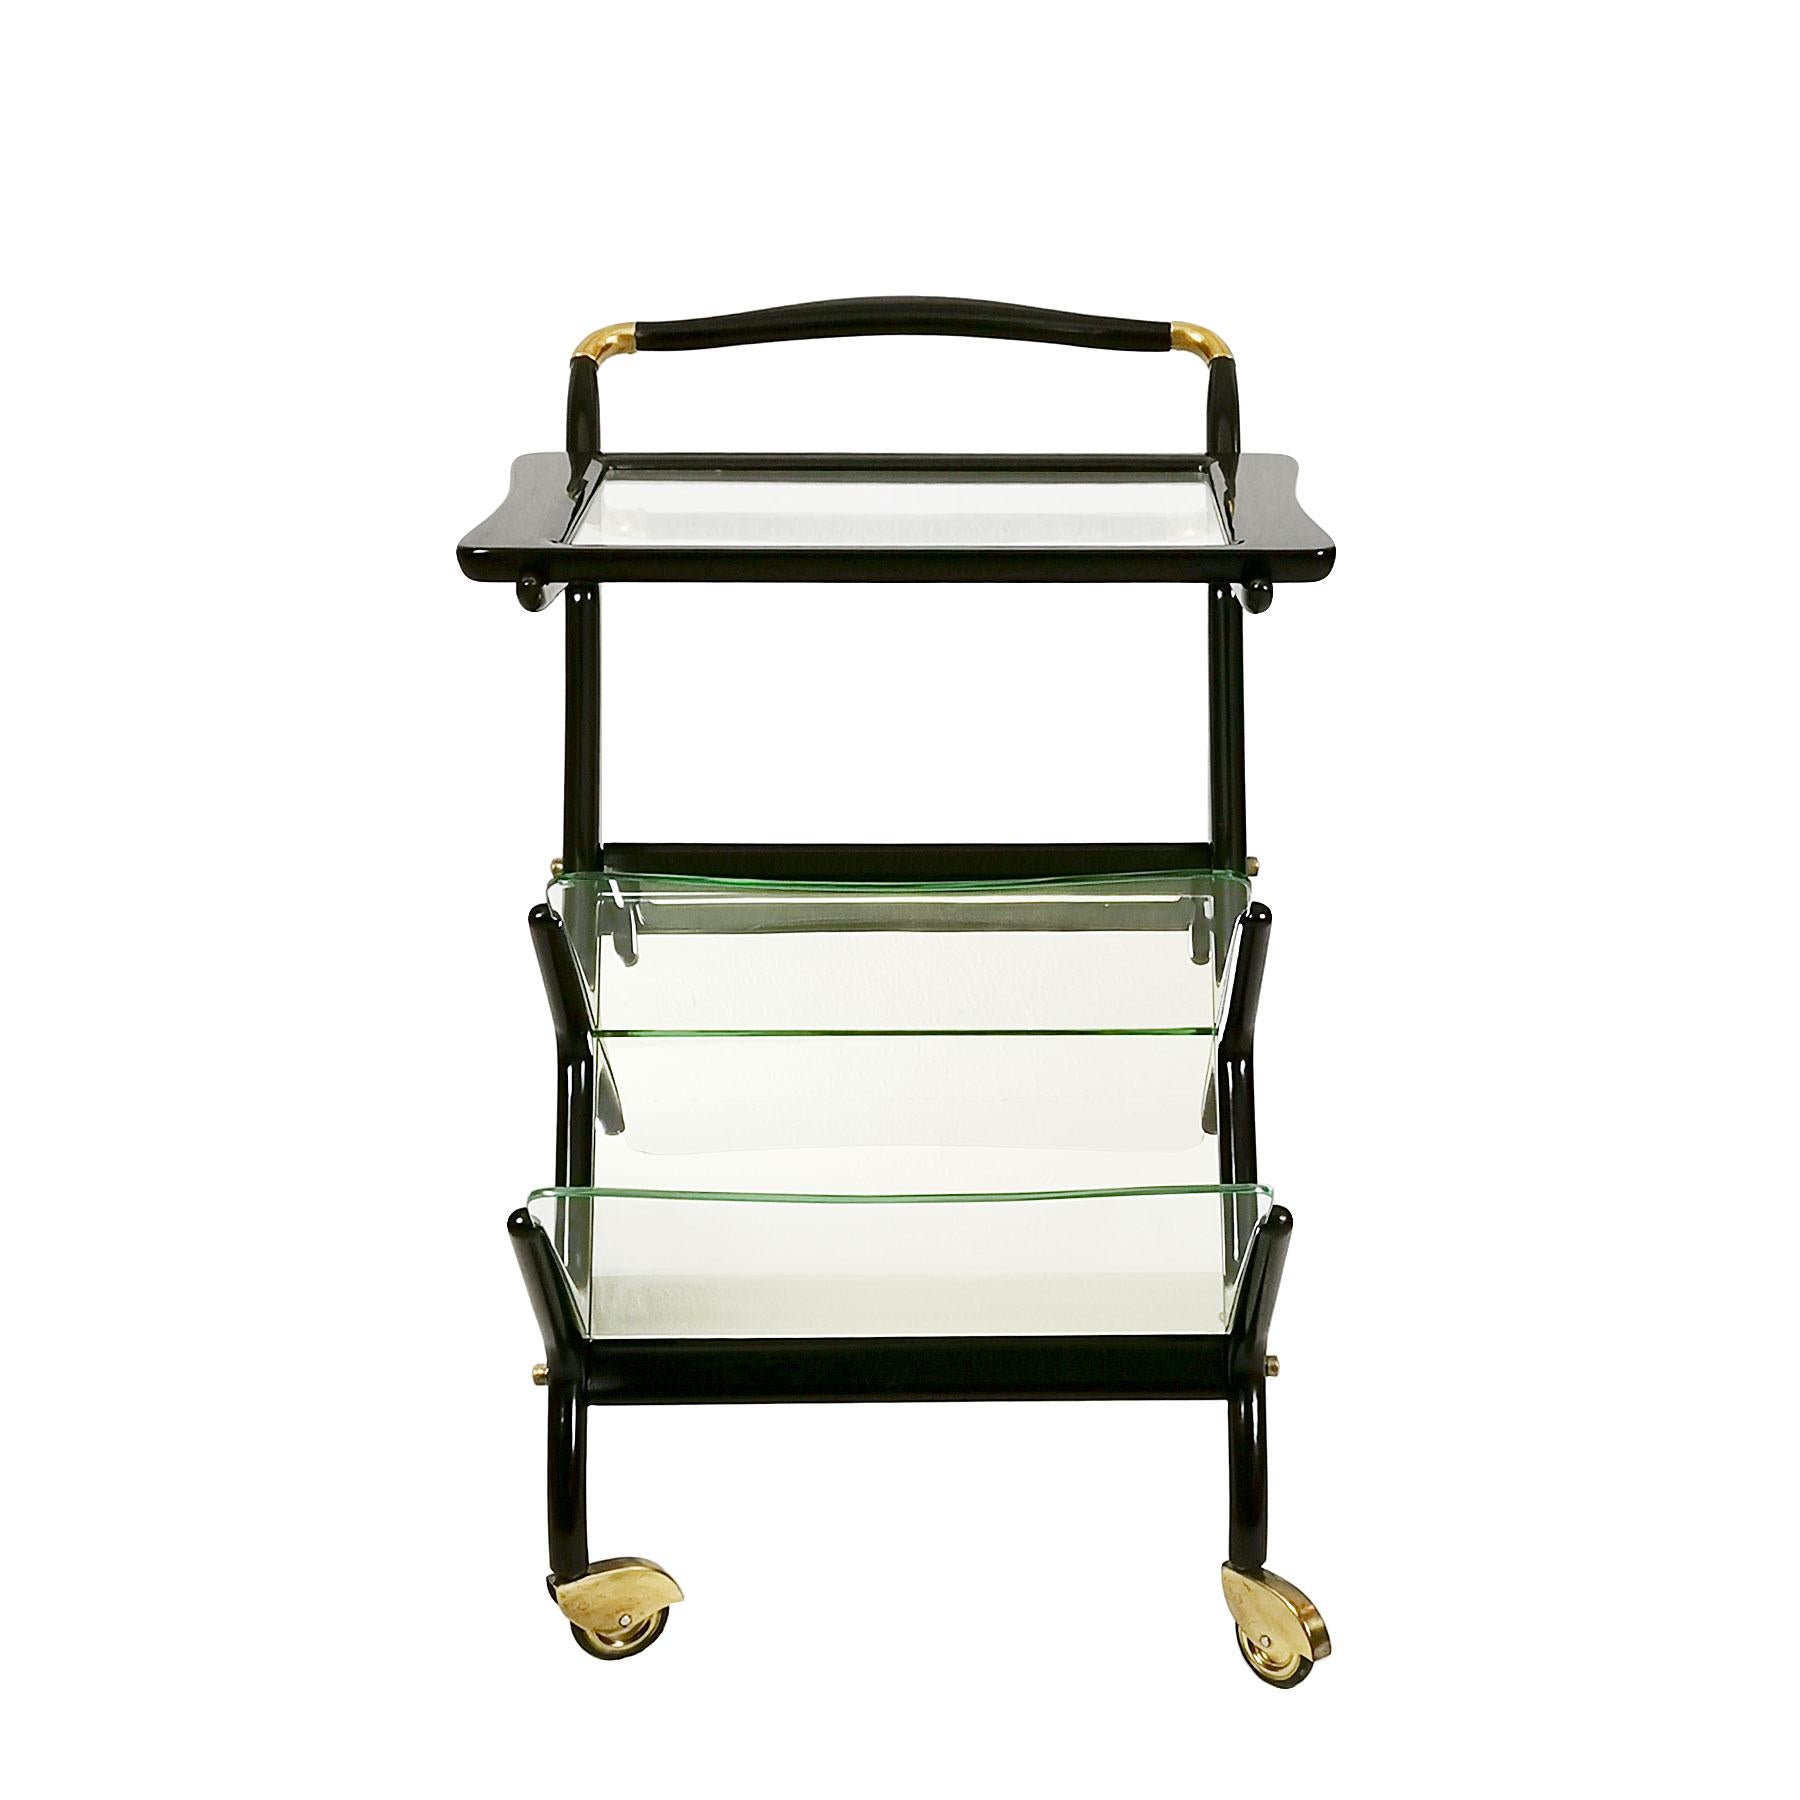 Small bar cart and magazine rack, stained solid mahogany, French polish, original glasses and mirror. Removable tray, polished brass hardware and wheels.
Design: Cesare Lacca 

Italy, circa 1950.